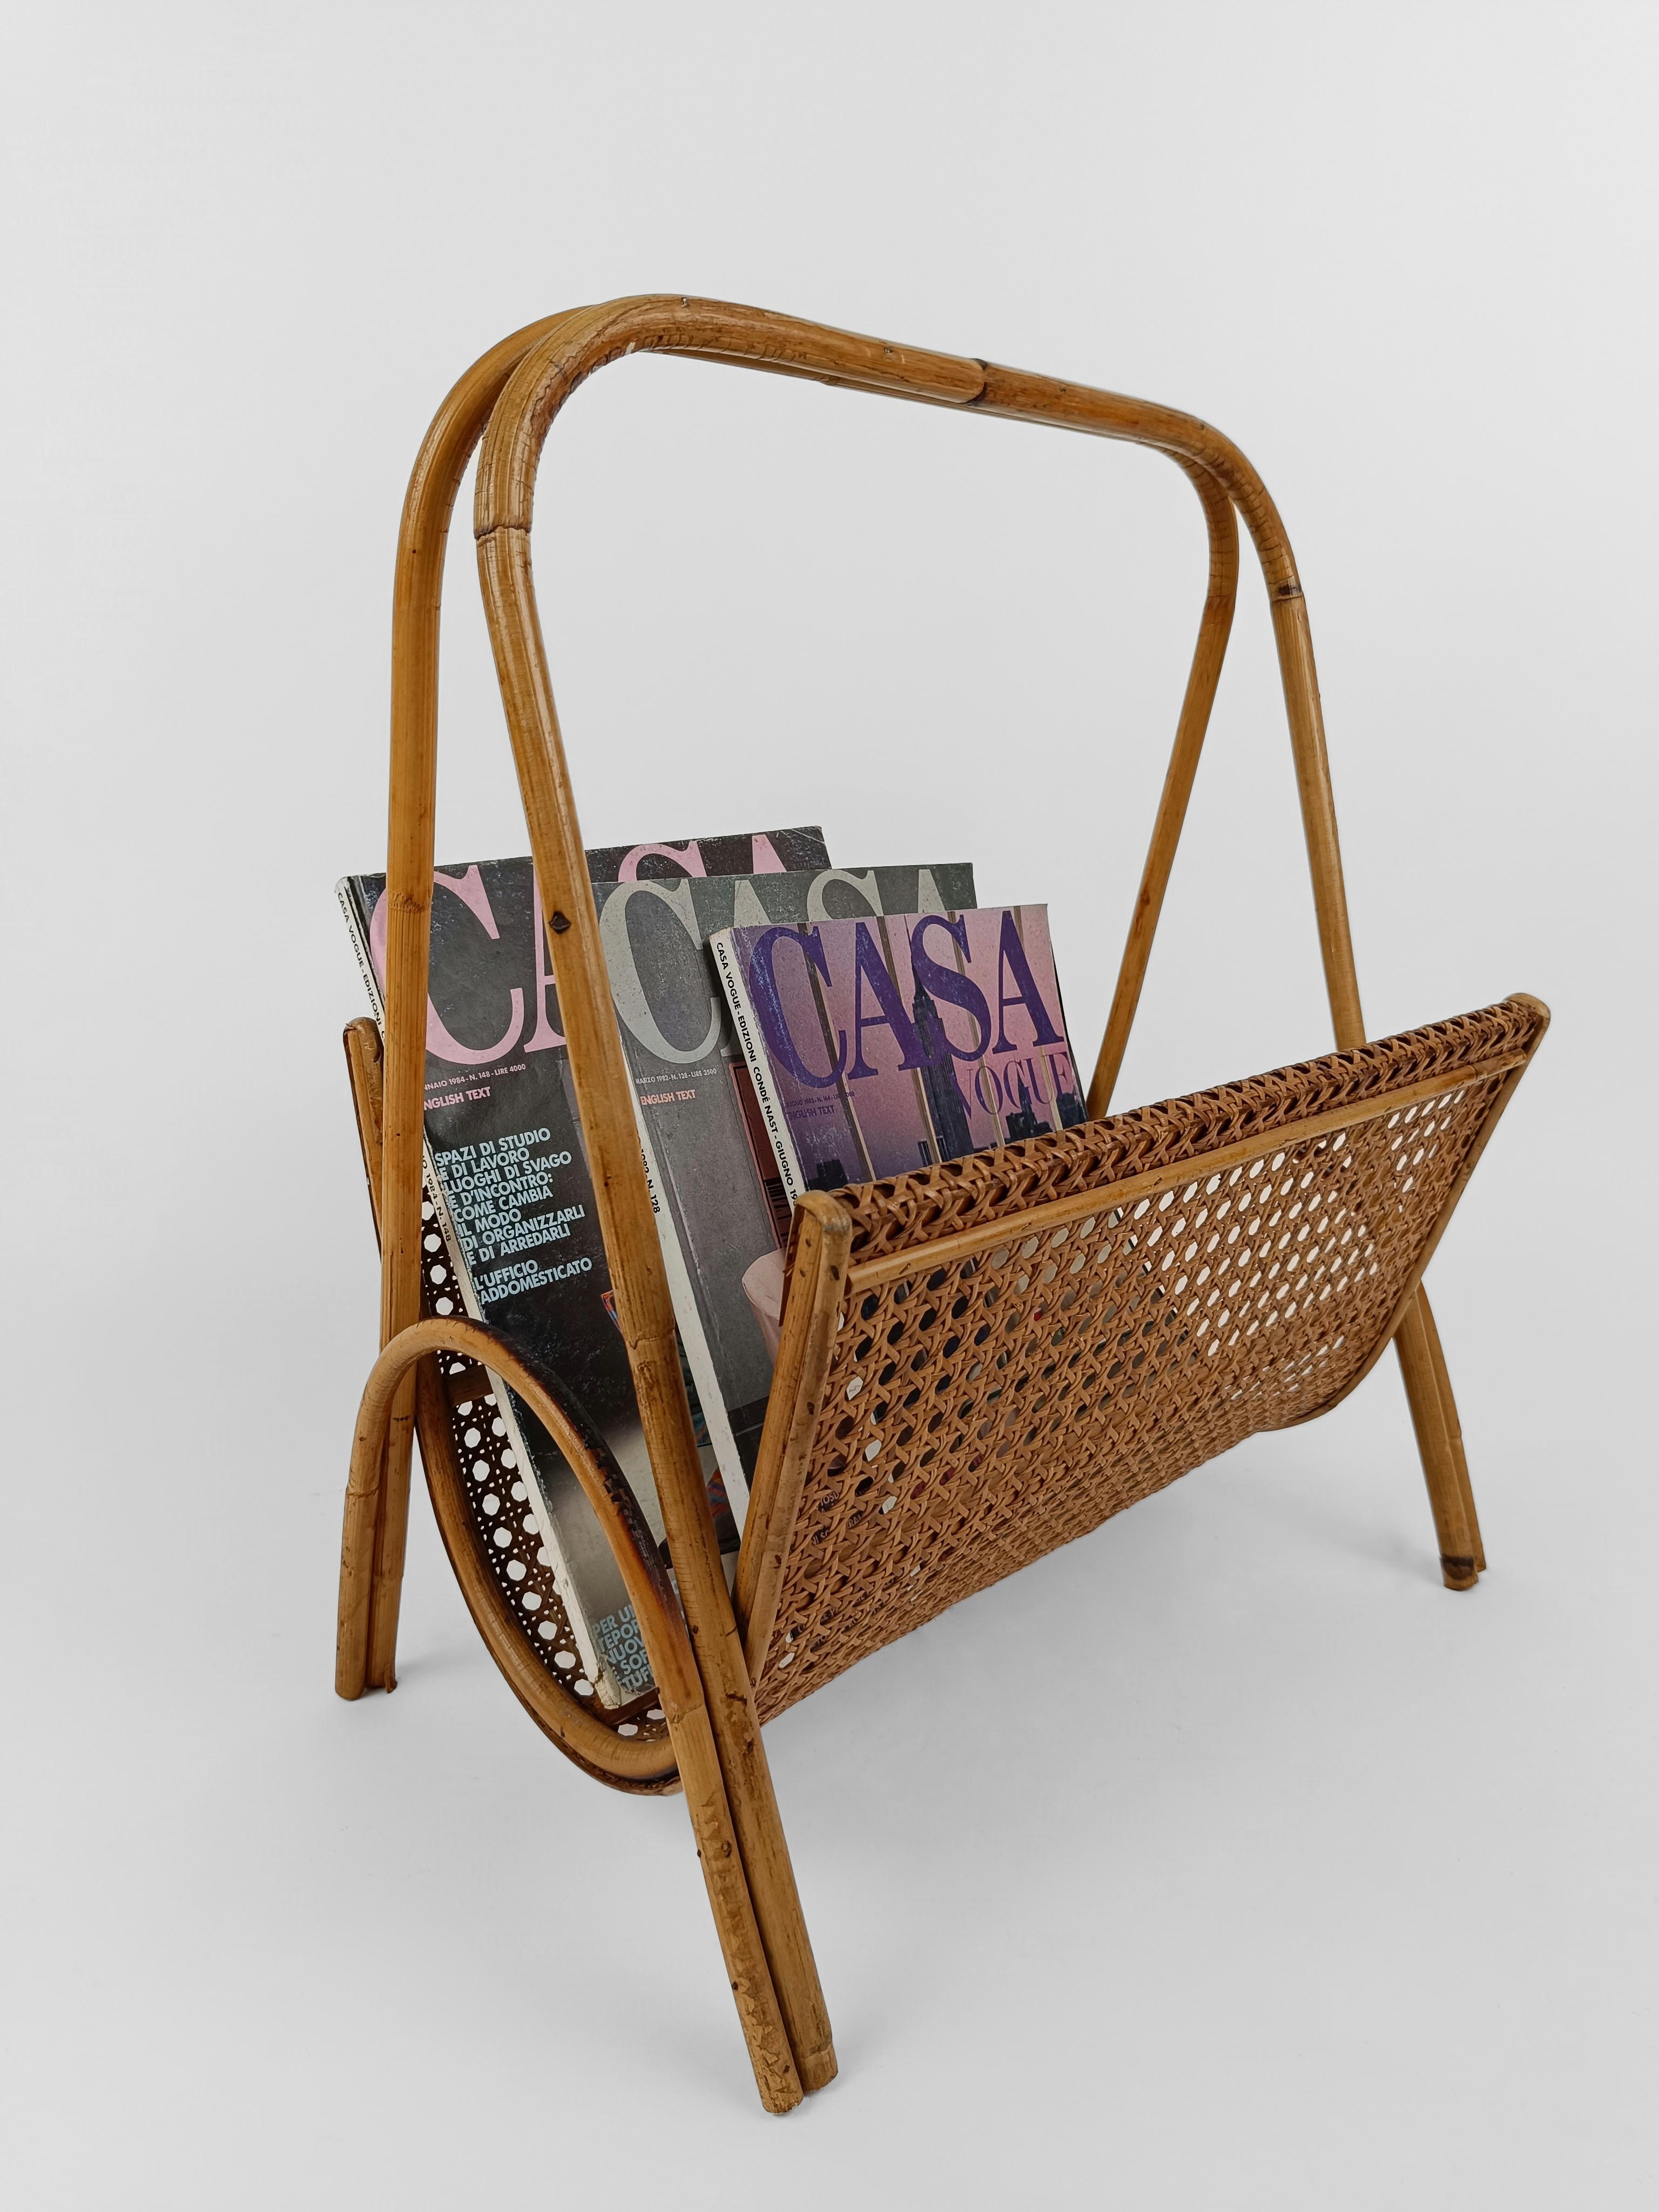 Refined magazine rack made in Italy between the 50s and 60s.
Handmade by flexing thin bamboo and rattan canes, this vintage magazine holder is covered in Vienna straw; the wheat color of the bamboo and other natural fibers used is enriched by the